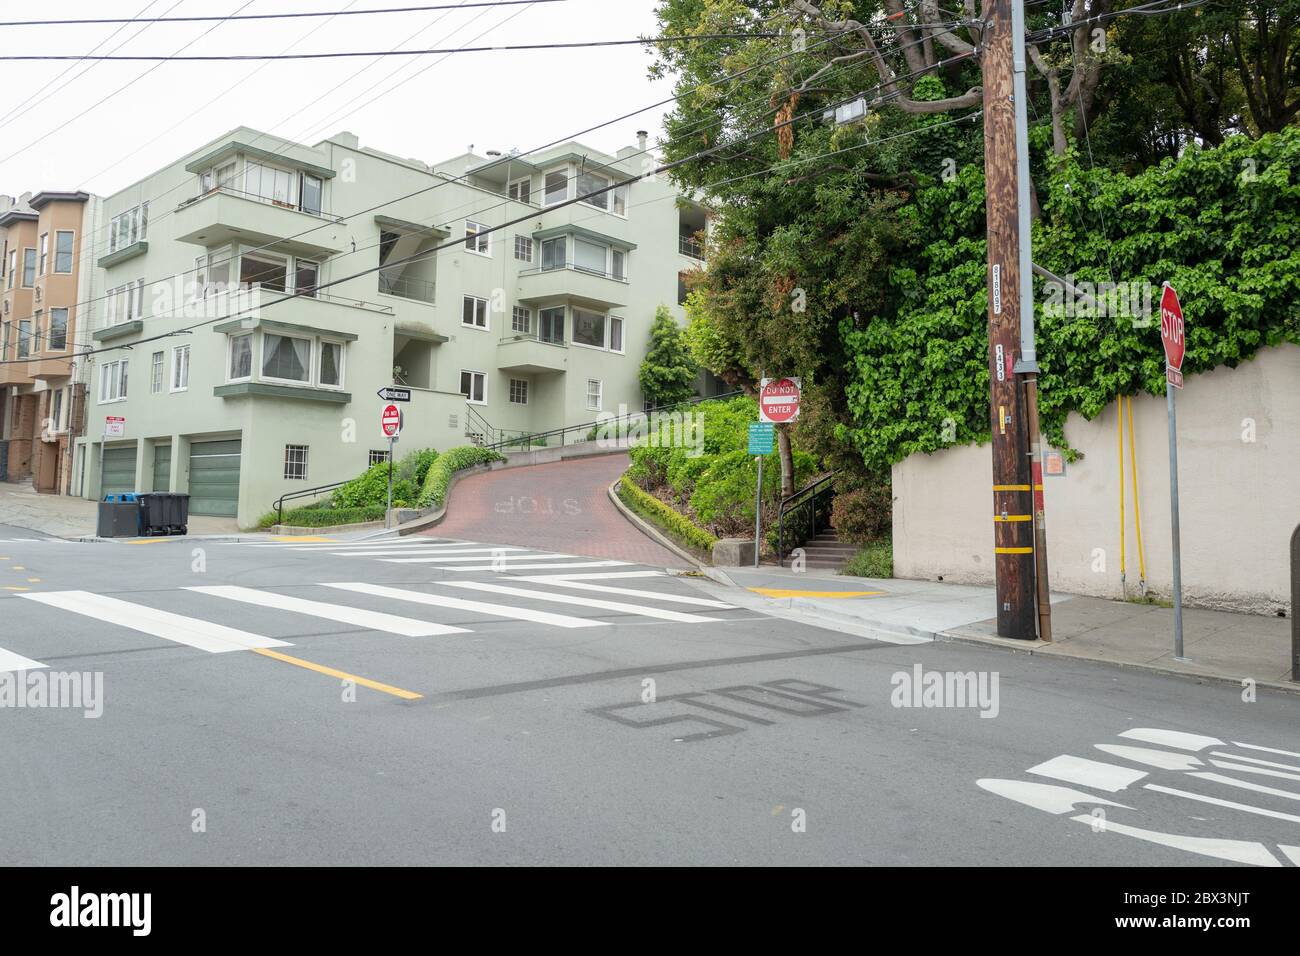 The iconic Lombard Street in San Francisco, California was deserted during an outbreak of the COVID-19 coronavirus, April 8, 2020. () Stock Photo